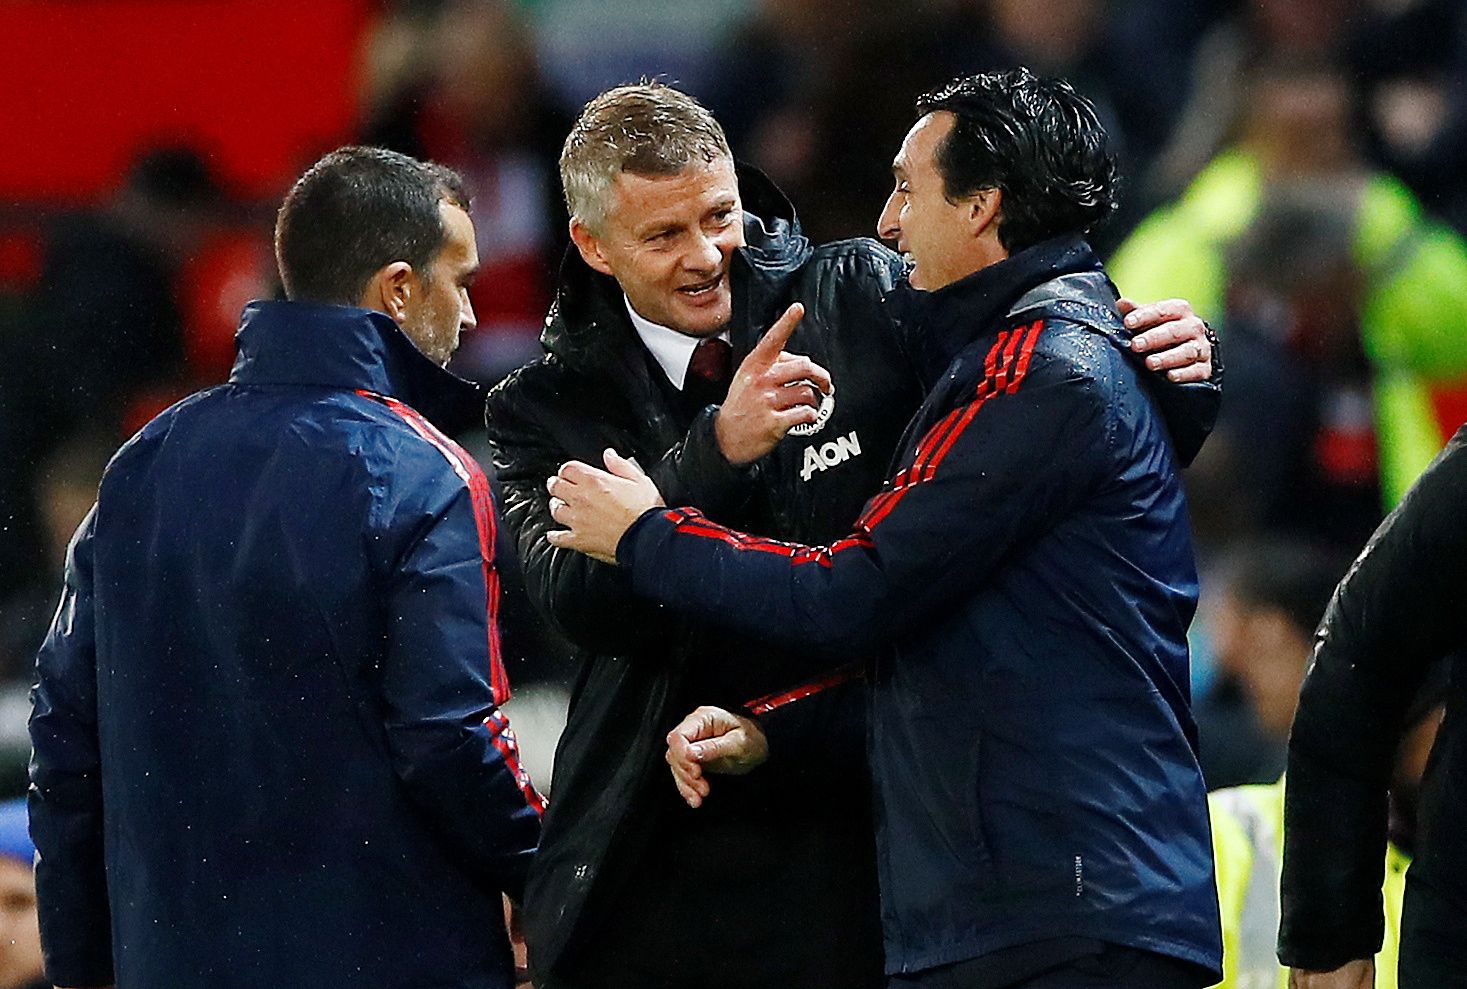 Soccer Football - Premier League - Manchester United v Arsenal - Old Trafford, Manchester, Britain - September 30, 2019   Manchester United manager Ole Gunnar Solskjaer embraces Arsenal manager Unai Emery at the end of the match    Action Images via Reuters/Jason Cairnduff    EDITORIAL USE ONLY. No use with unauthorized audio, video, data, fixture lists, club/league logos or 